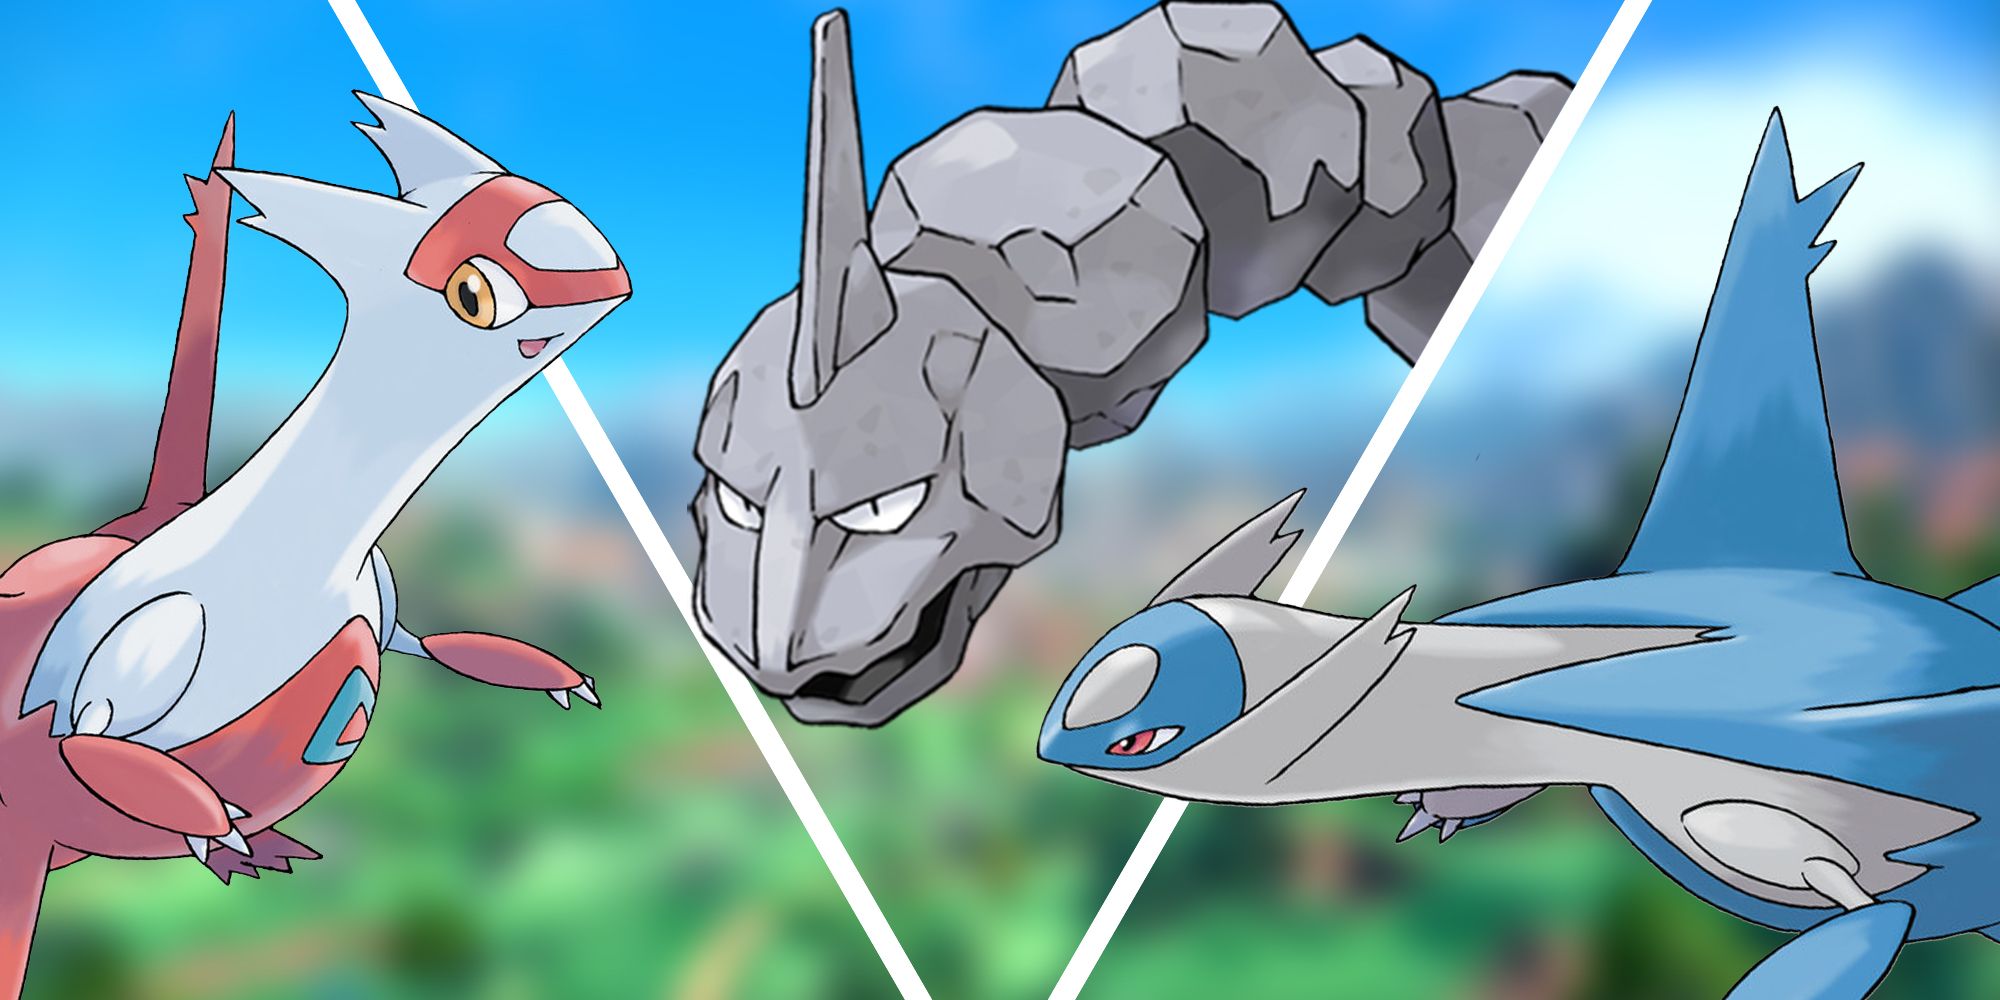 From left to right, Latias, Onix, and Latios displayed over a blurred background.